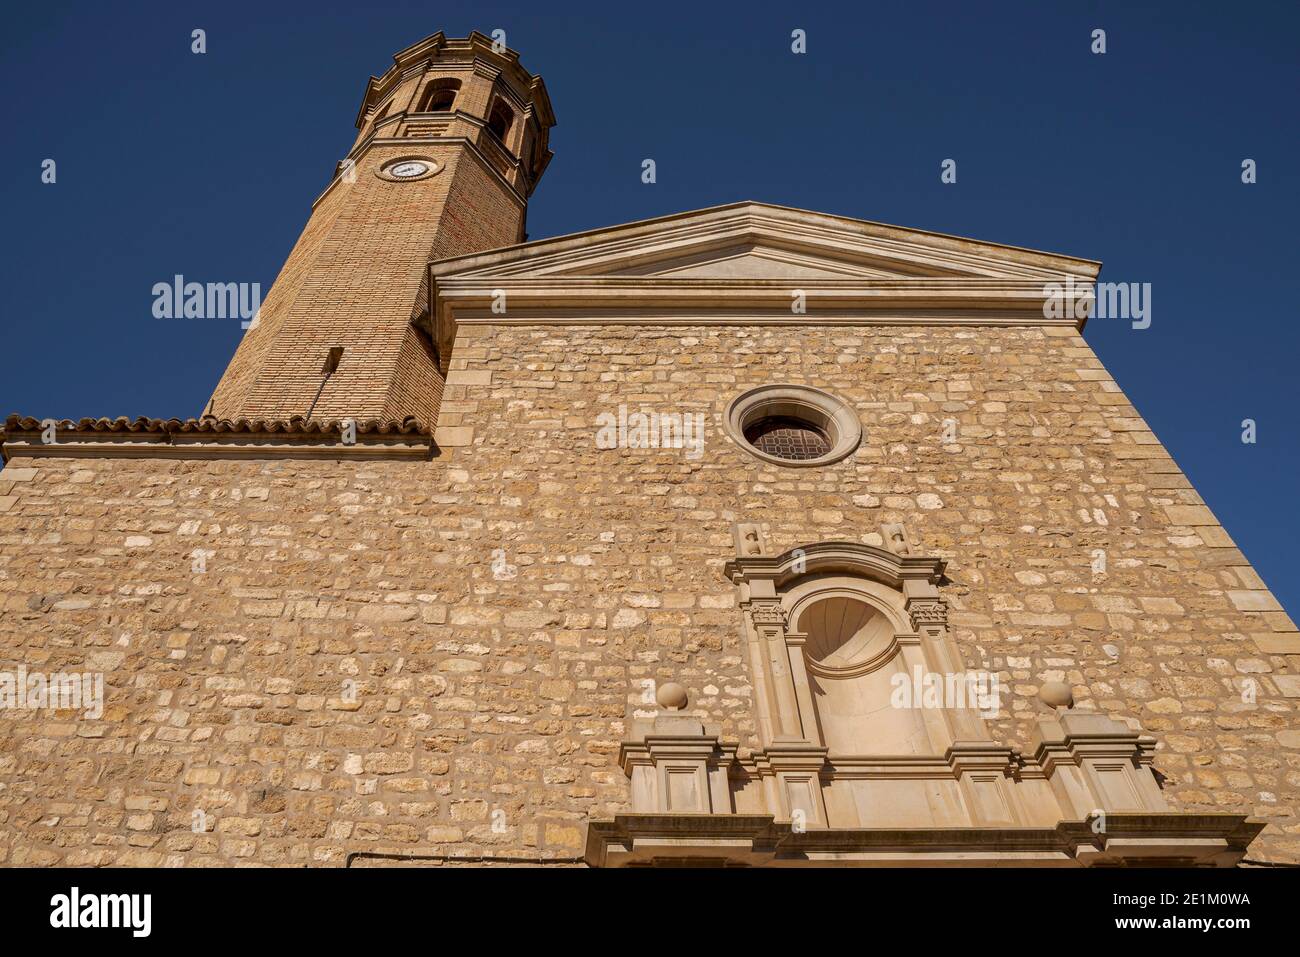 Church of Our Lady of the Assumption, in the village of Fuendetodos, province of Zaragoza, Spain. It was built in the 18th century Stock Photo